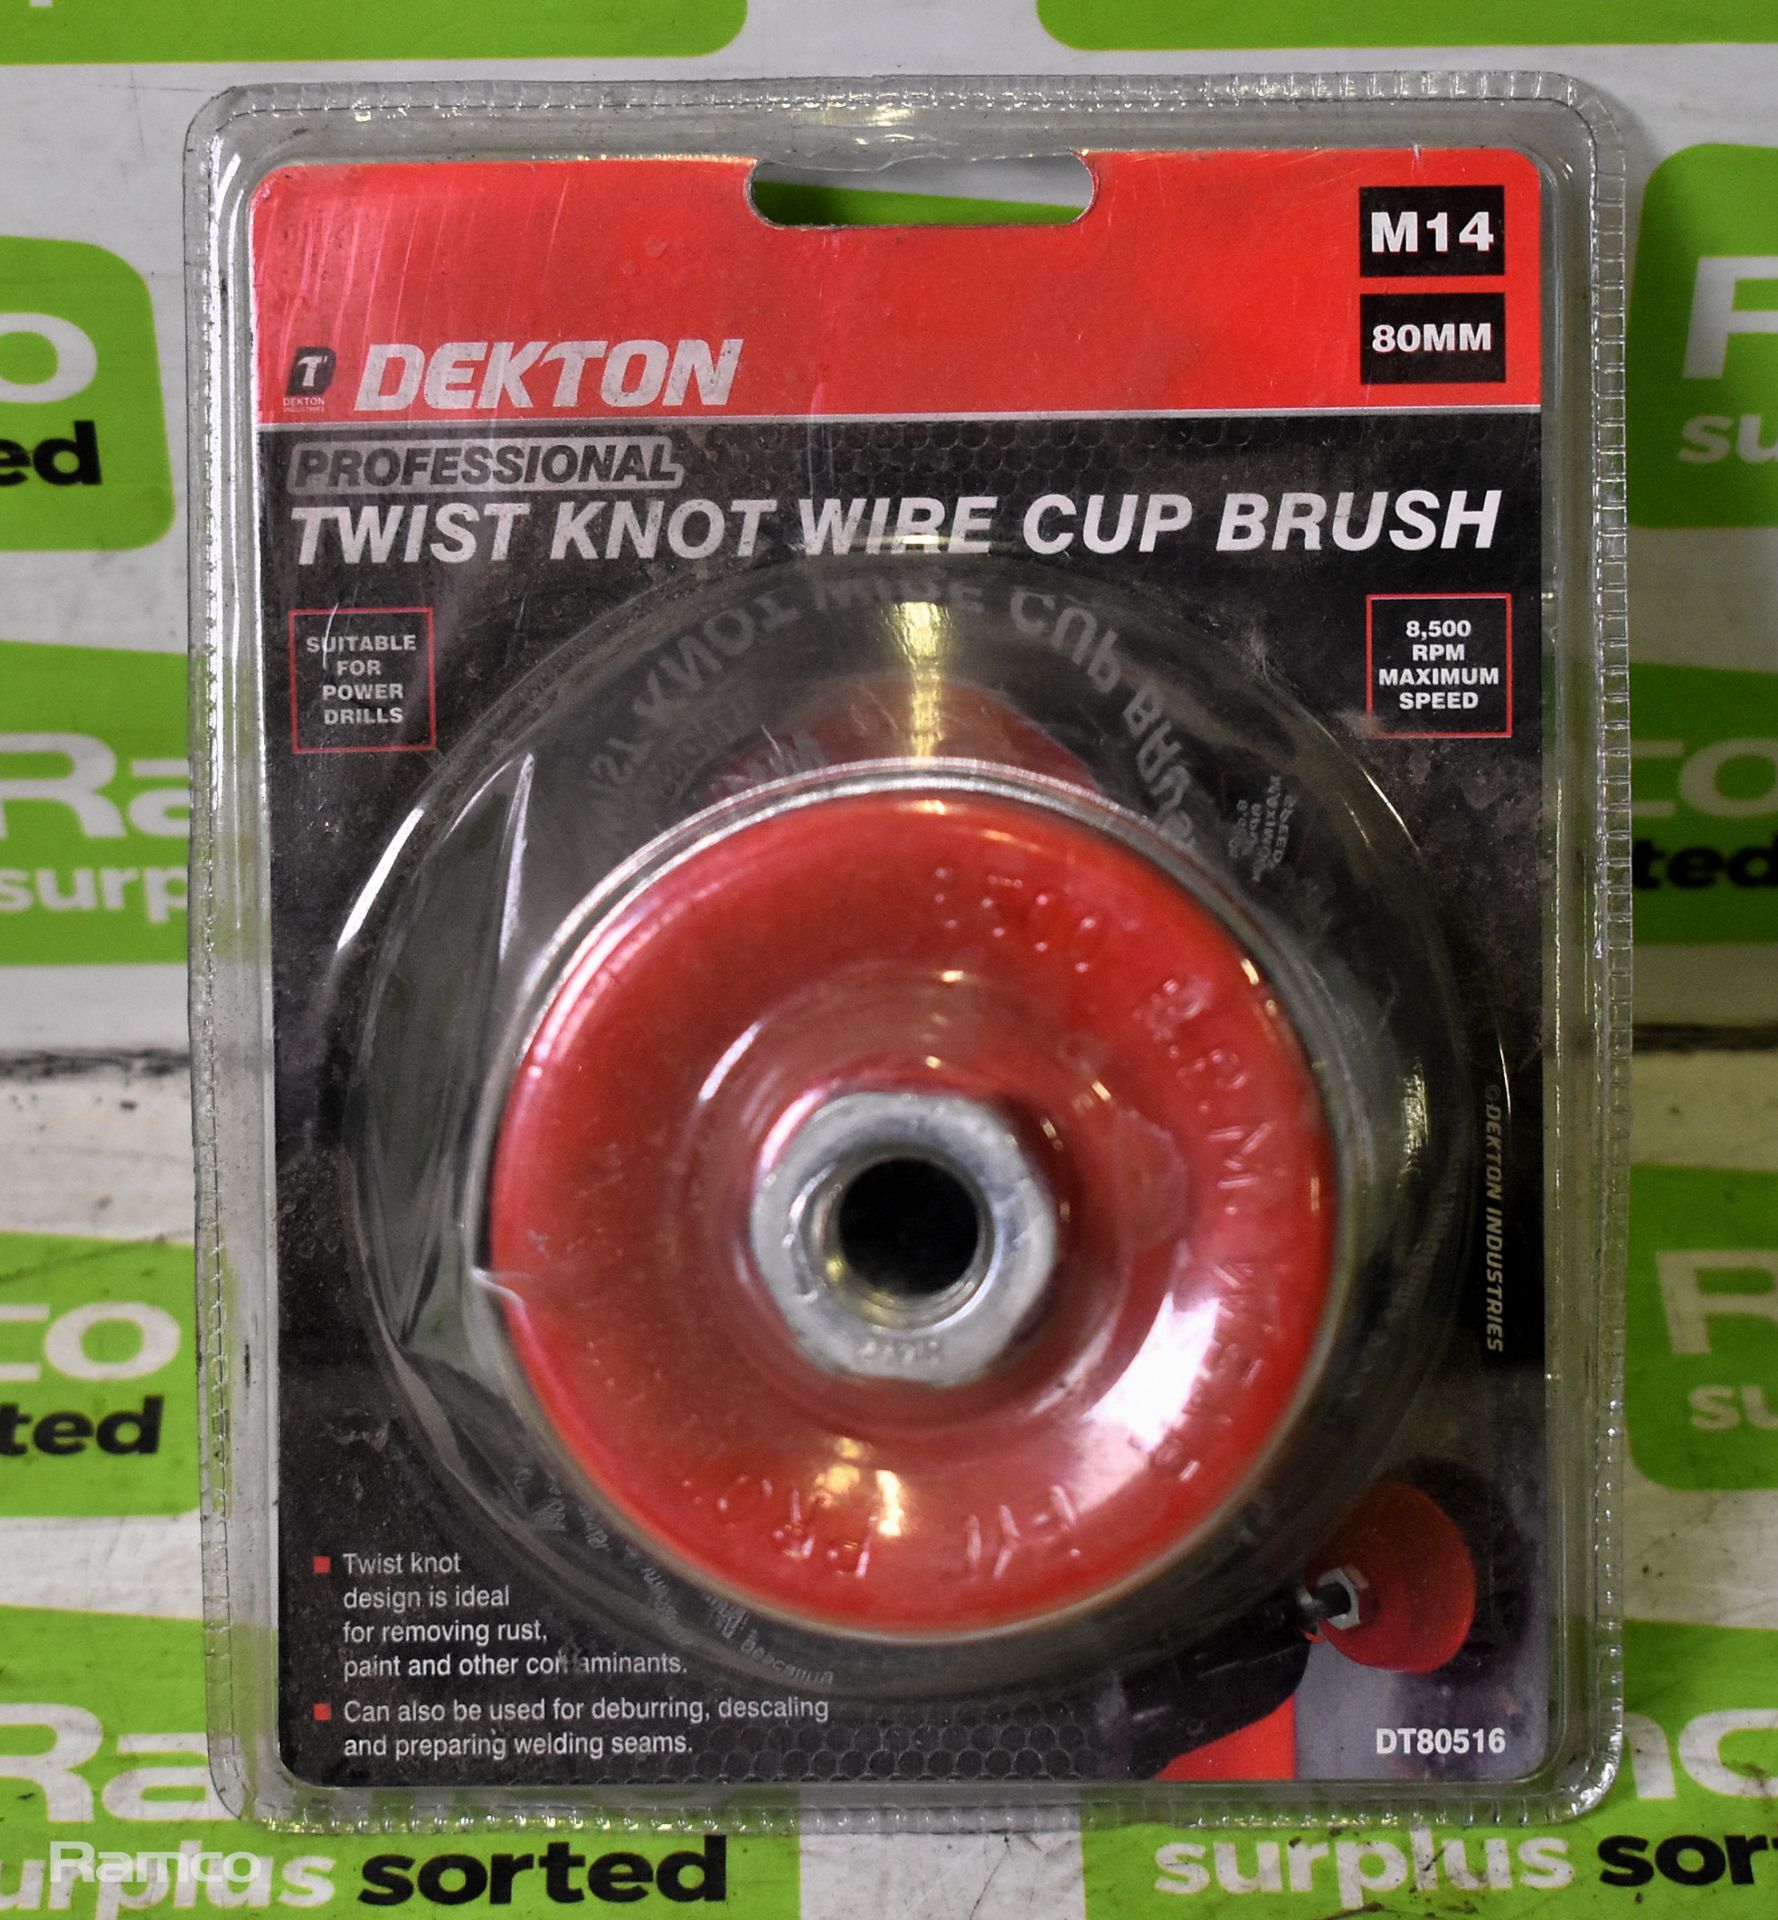 6x Dekton 80mm M14 twist knot wire cup brushes, 5x packs of Neilson steel ultra cutting discs - Image 2 of 12